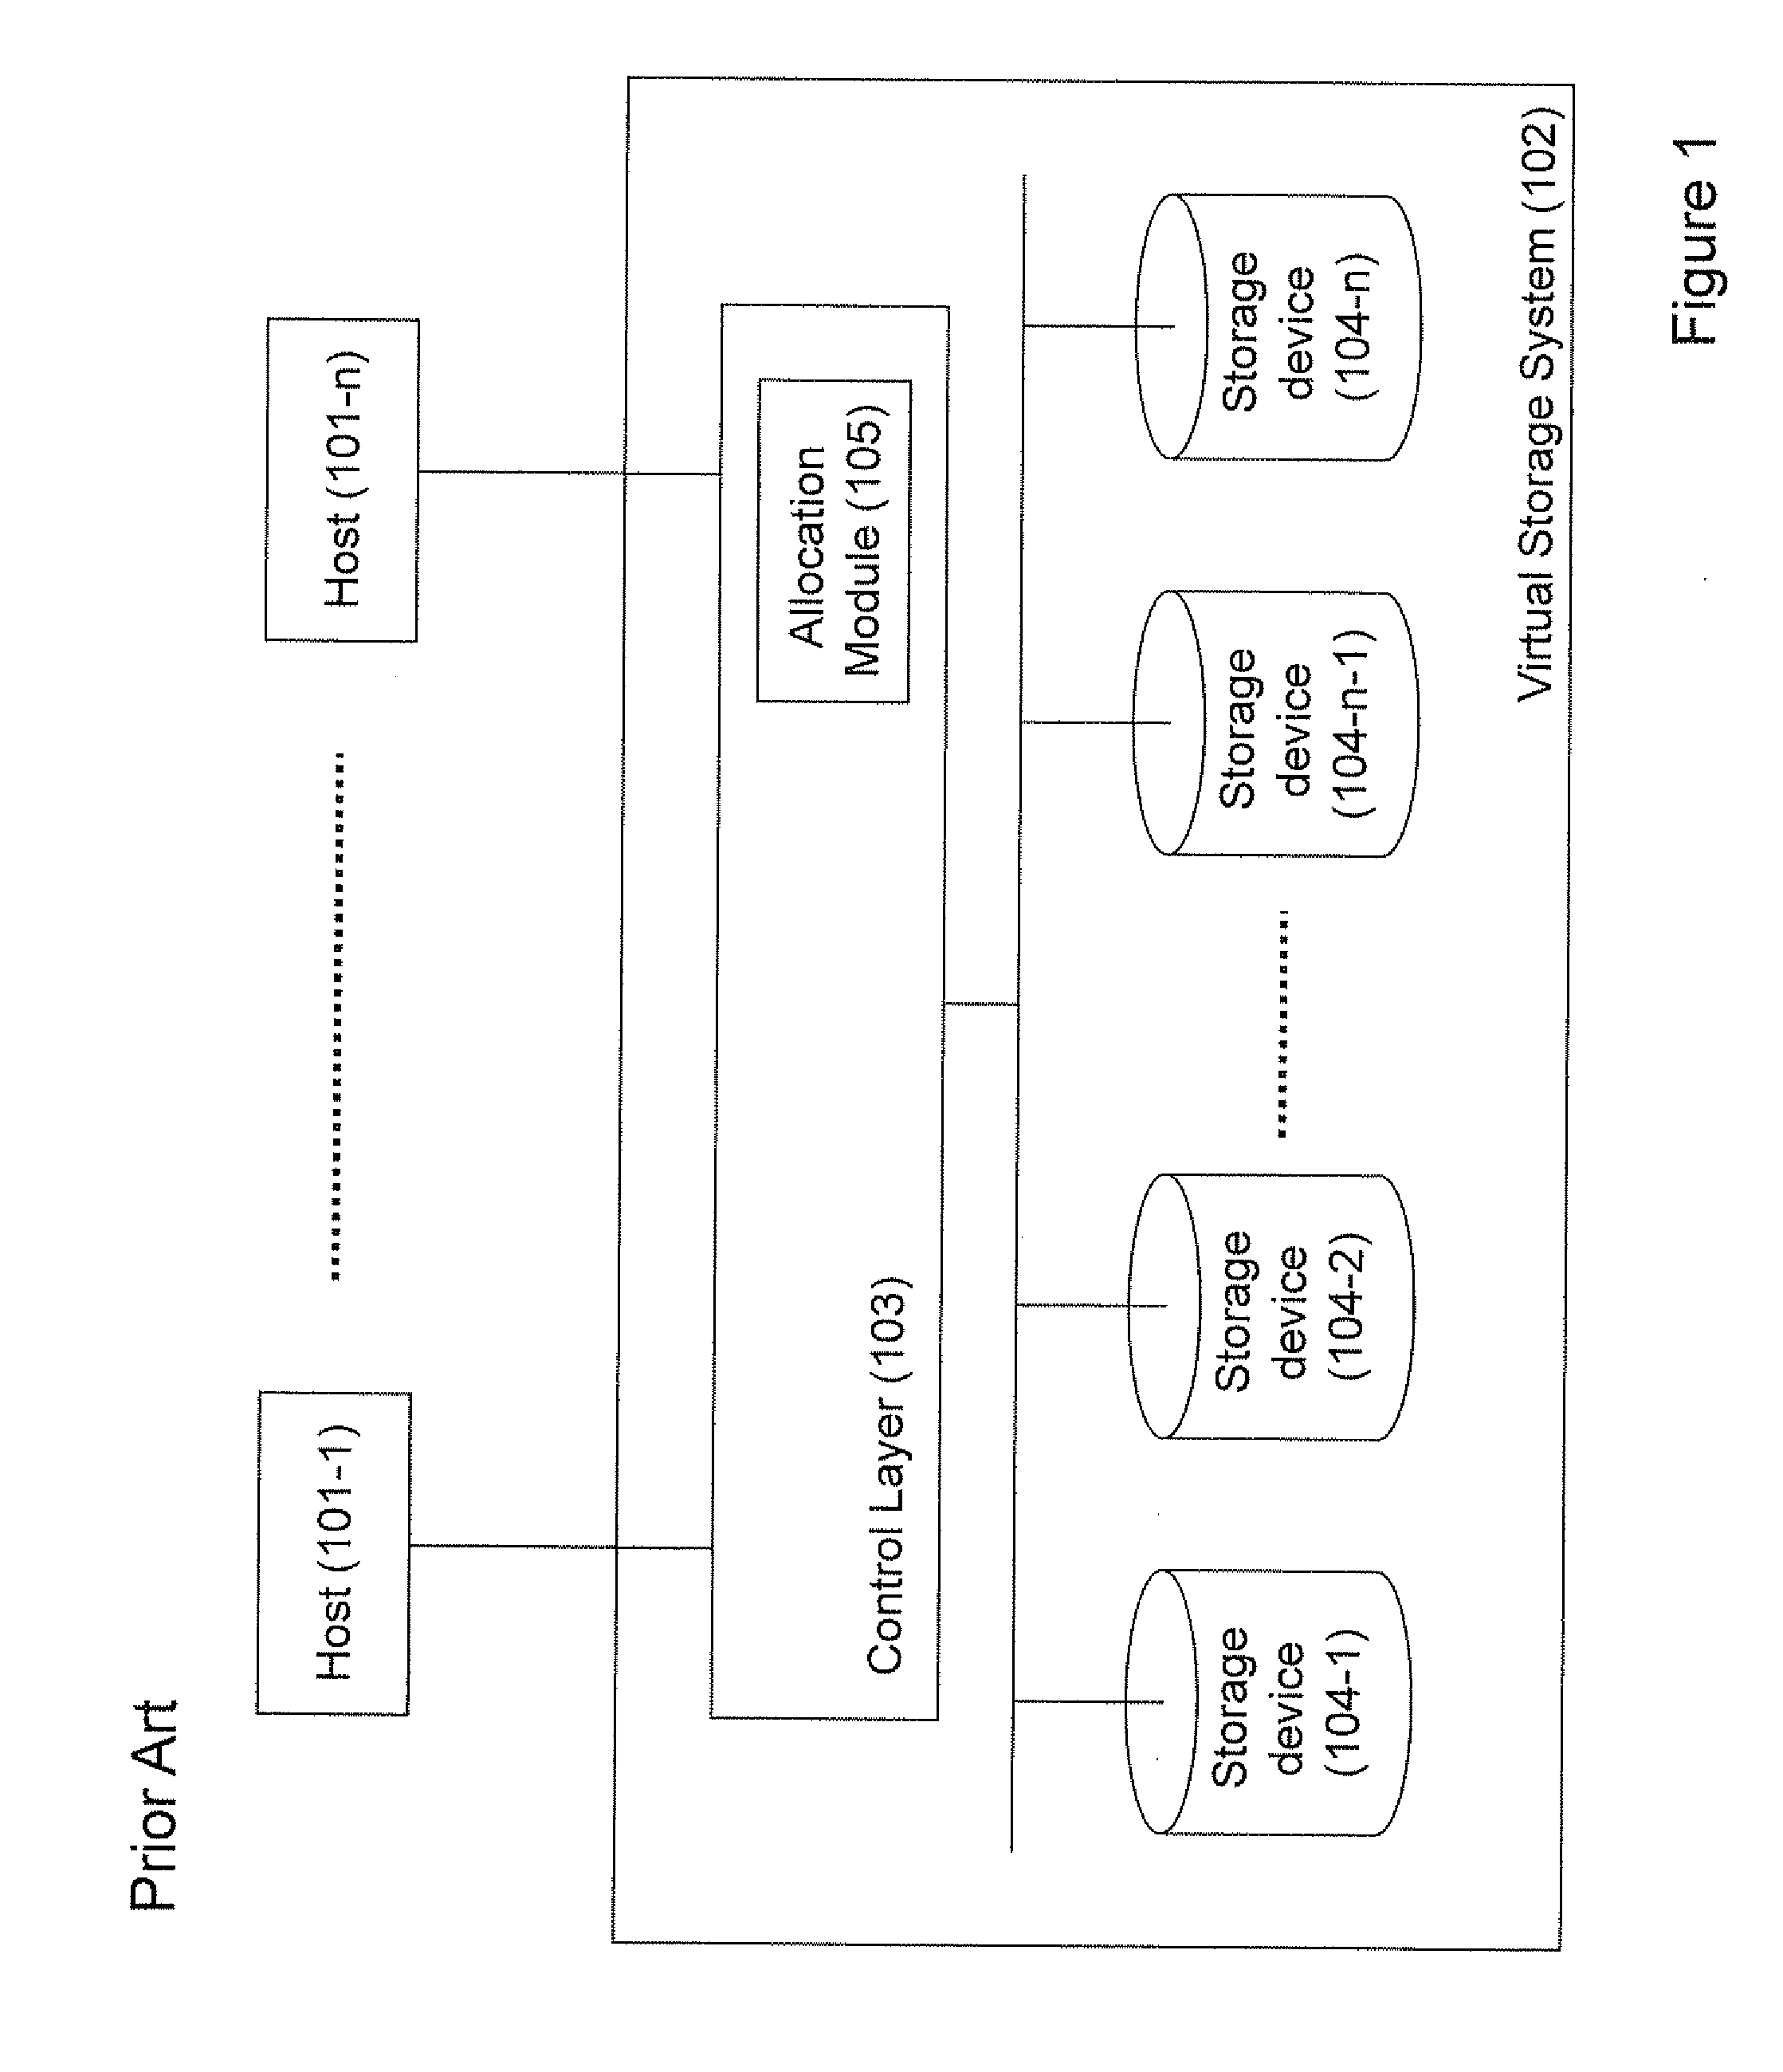 Virtualized storage system and method of operating thereof